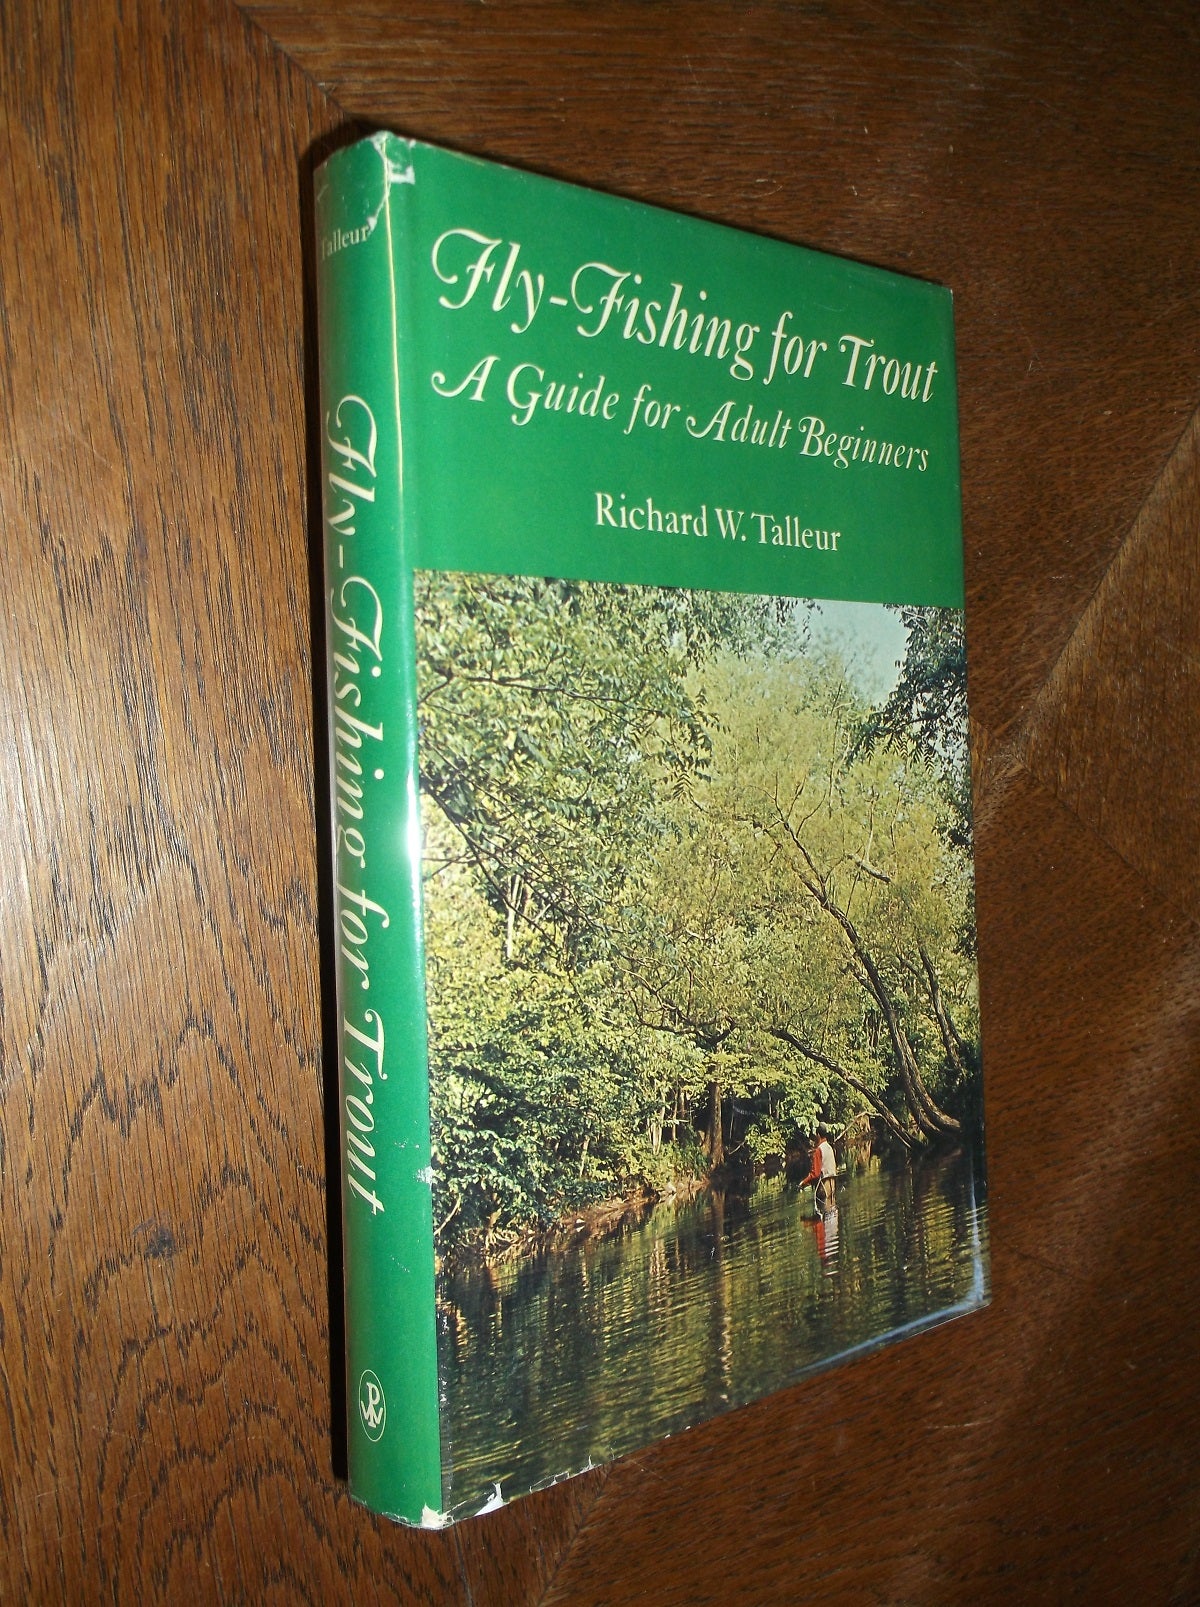 Fly-Fishing for Trout: A Guide for Adult Beginners